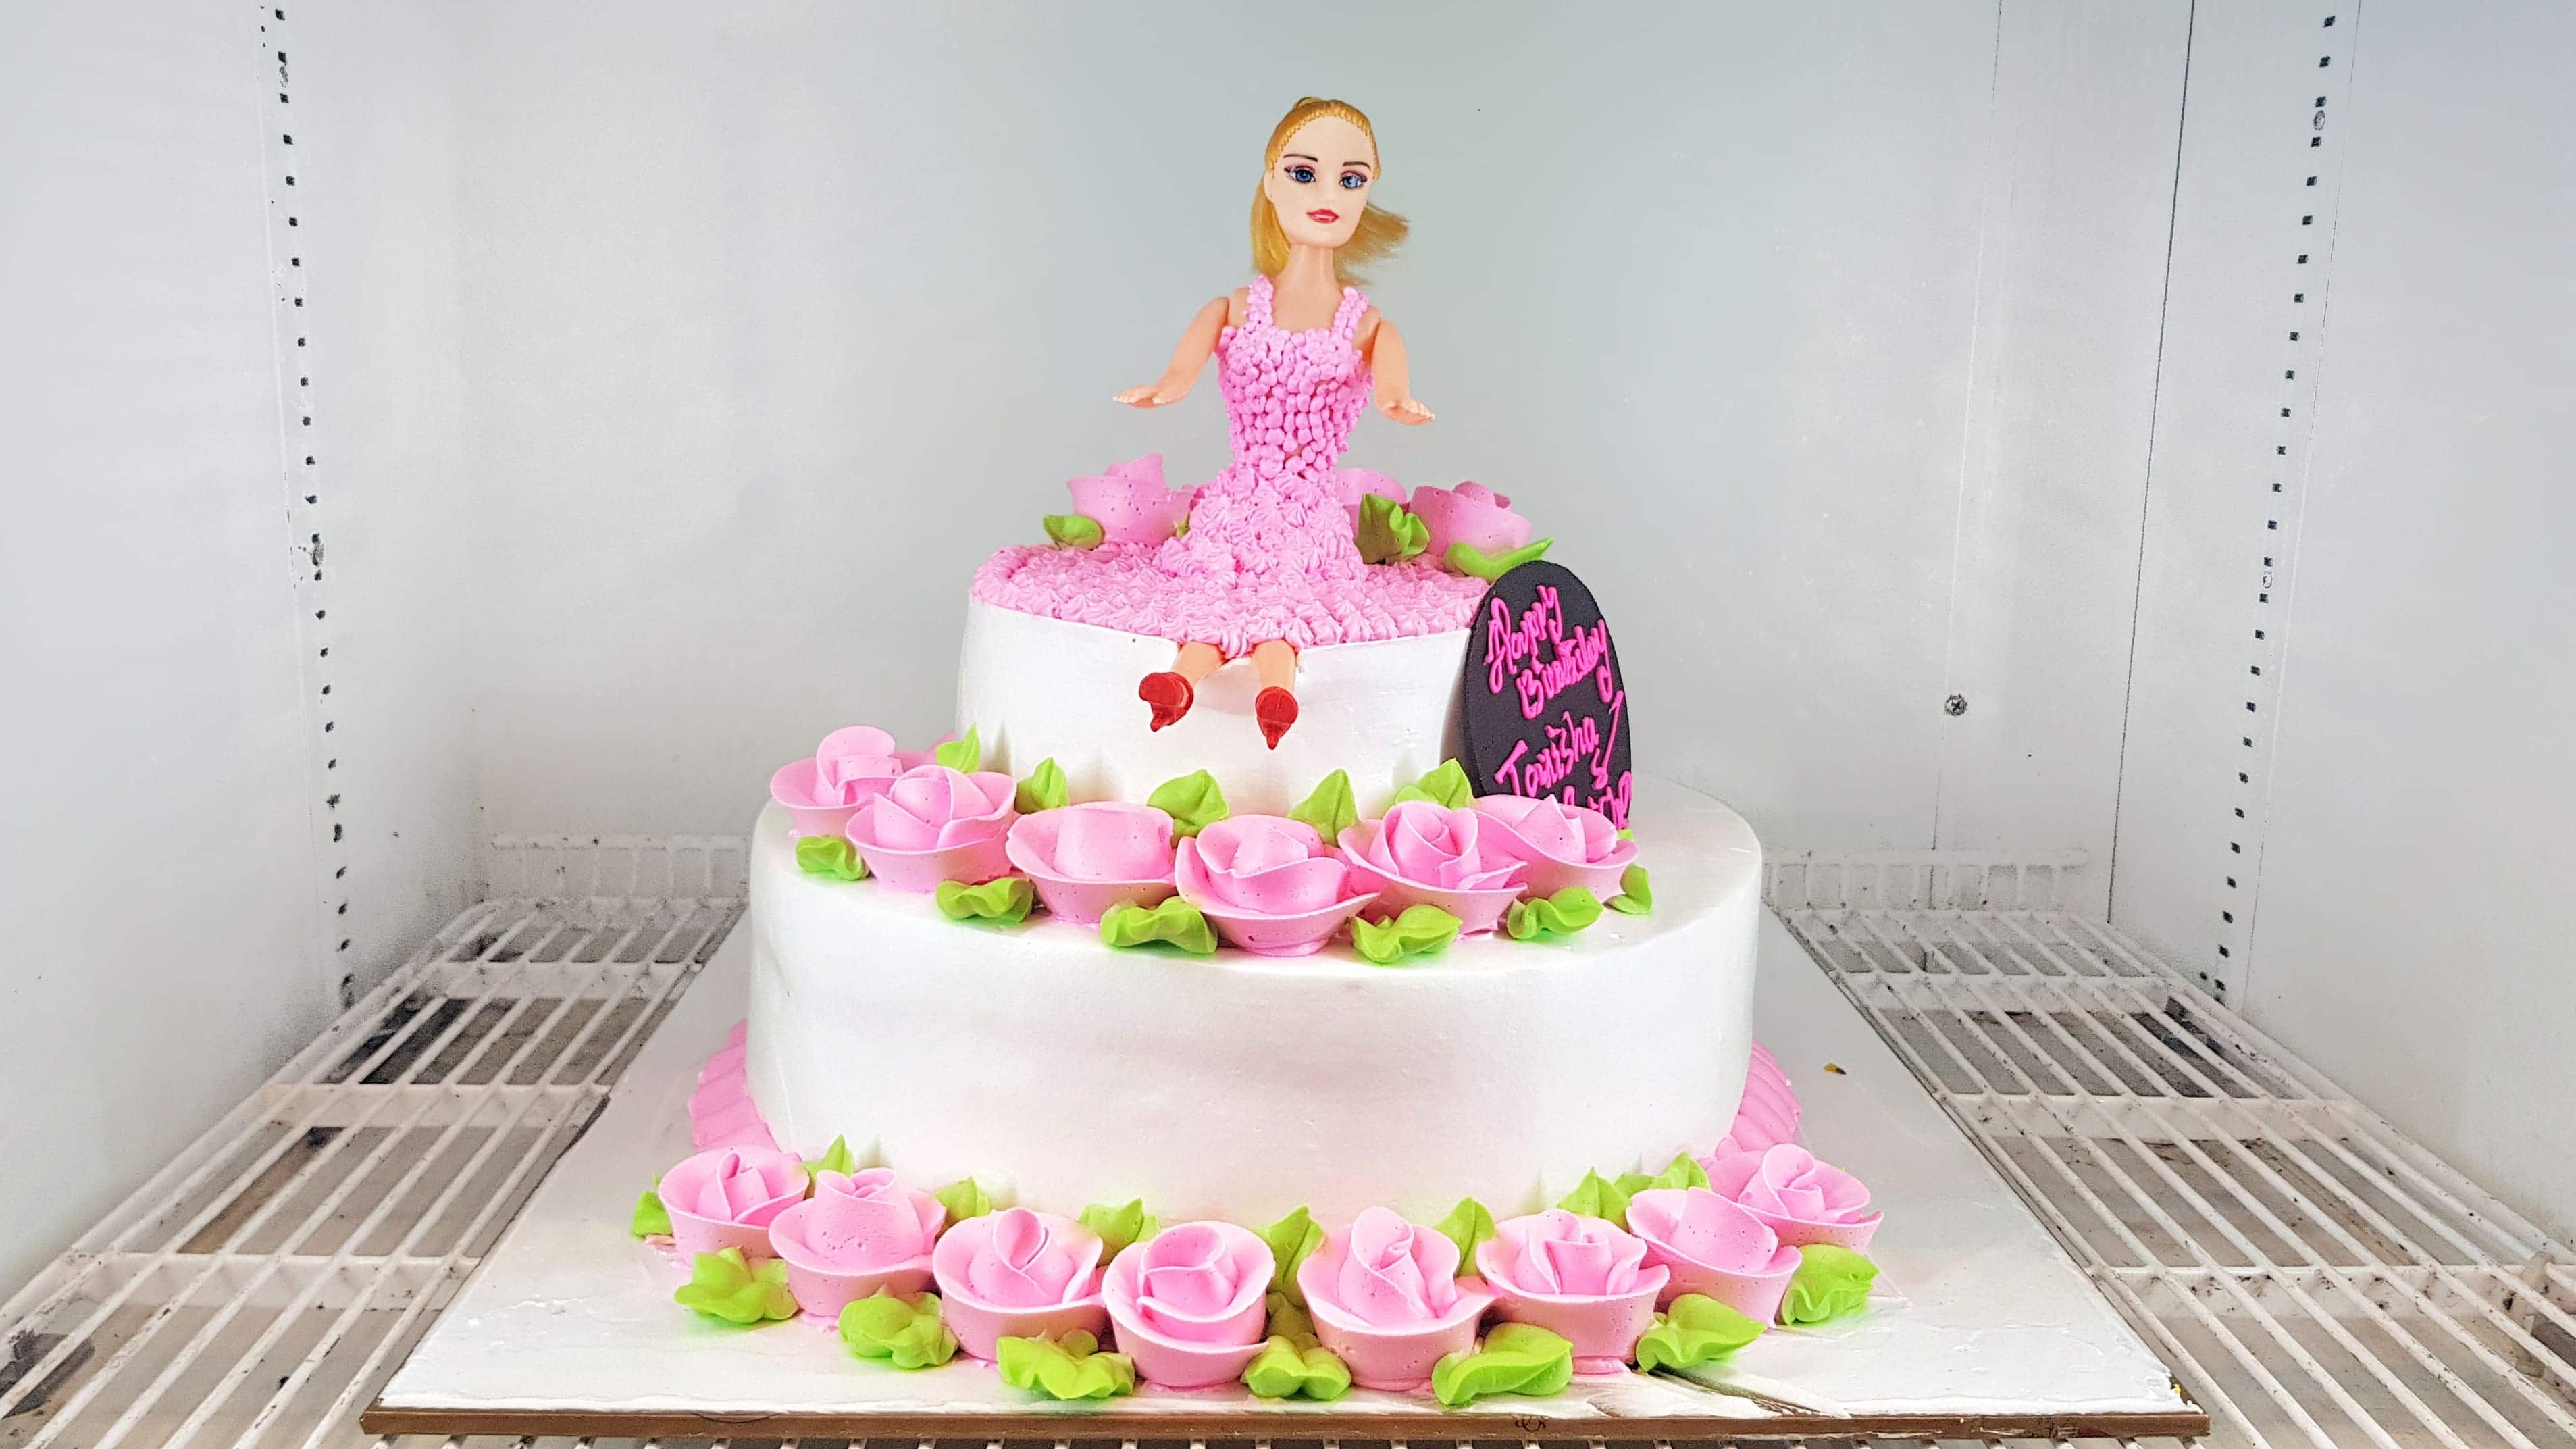 Monginis India  Here are some Special Doll Cakes Made at  Facebook